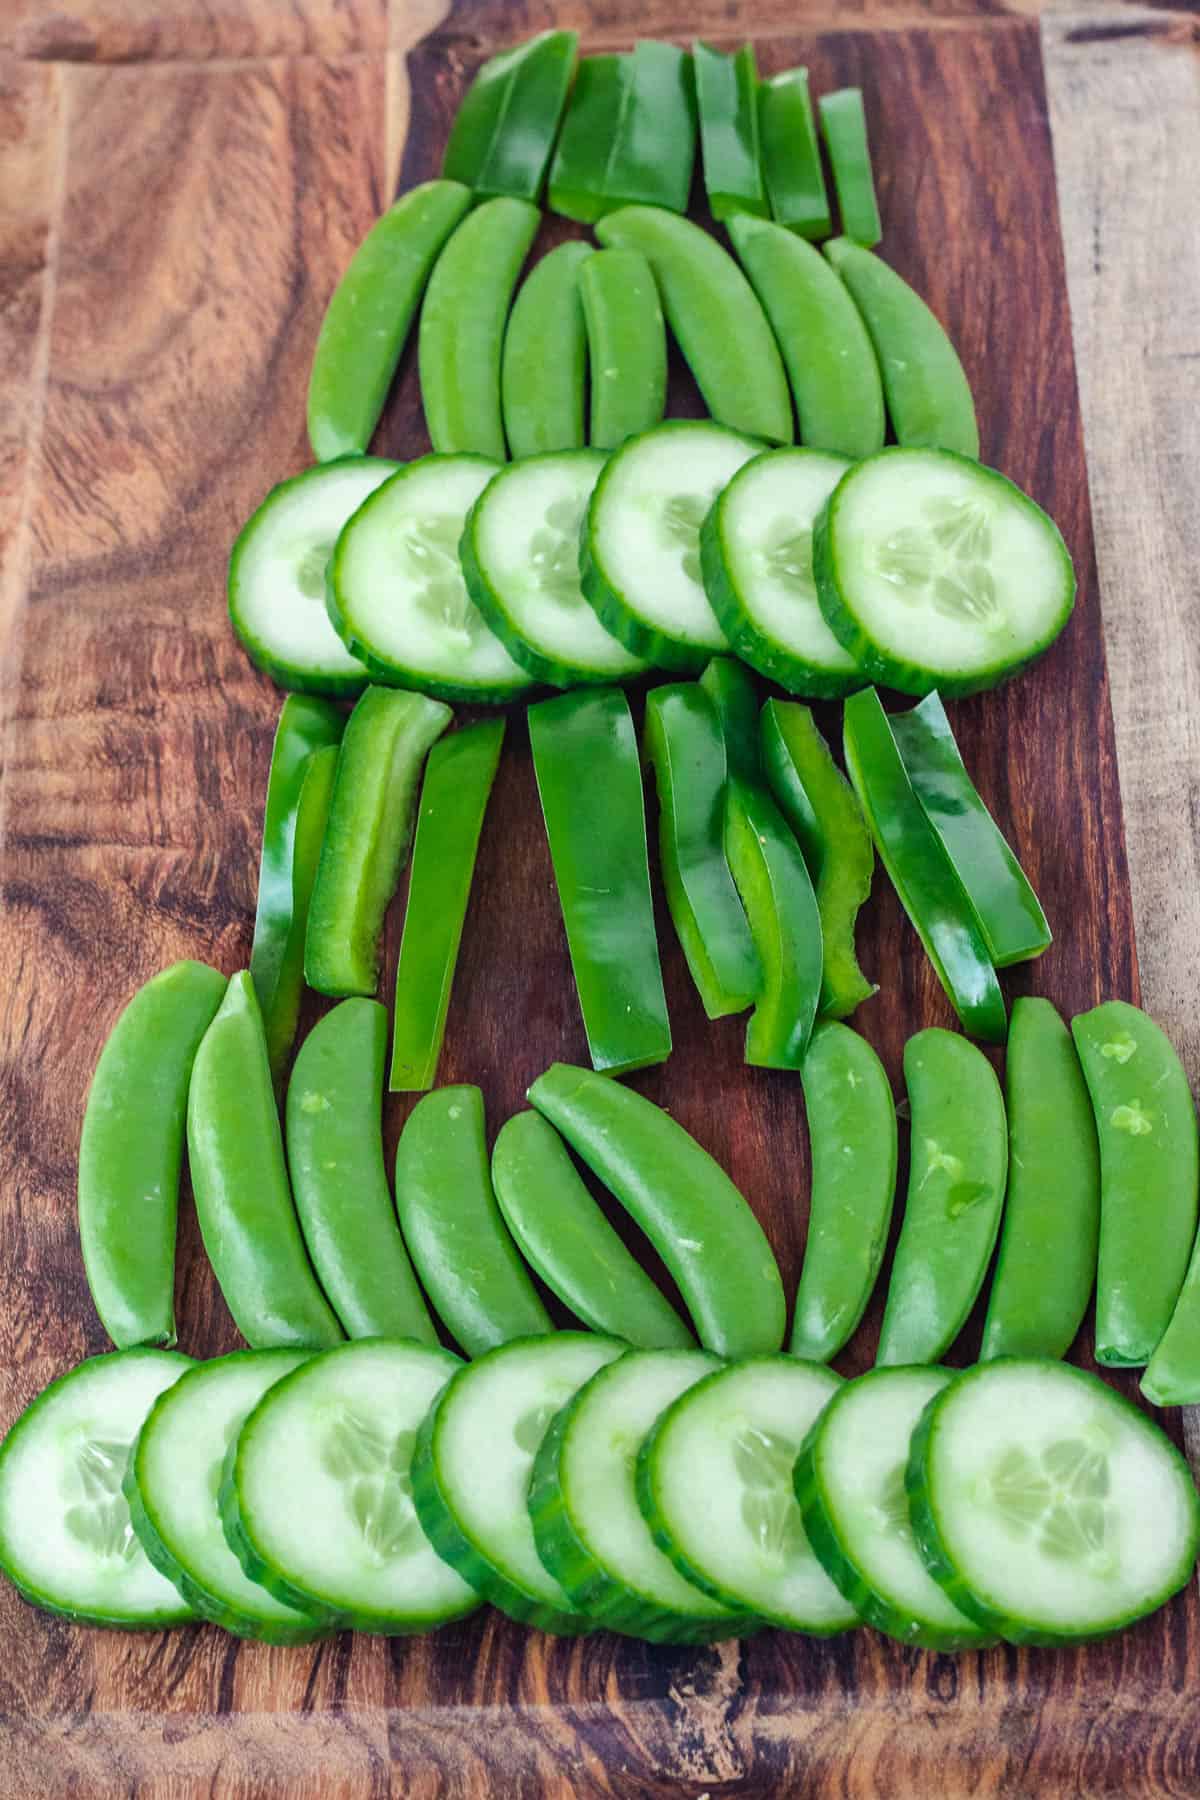 Cucumbers, snap peas, and green pepper slices arranges in rows to look like a pine tree.
